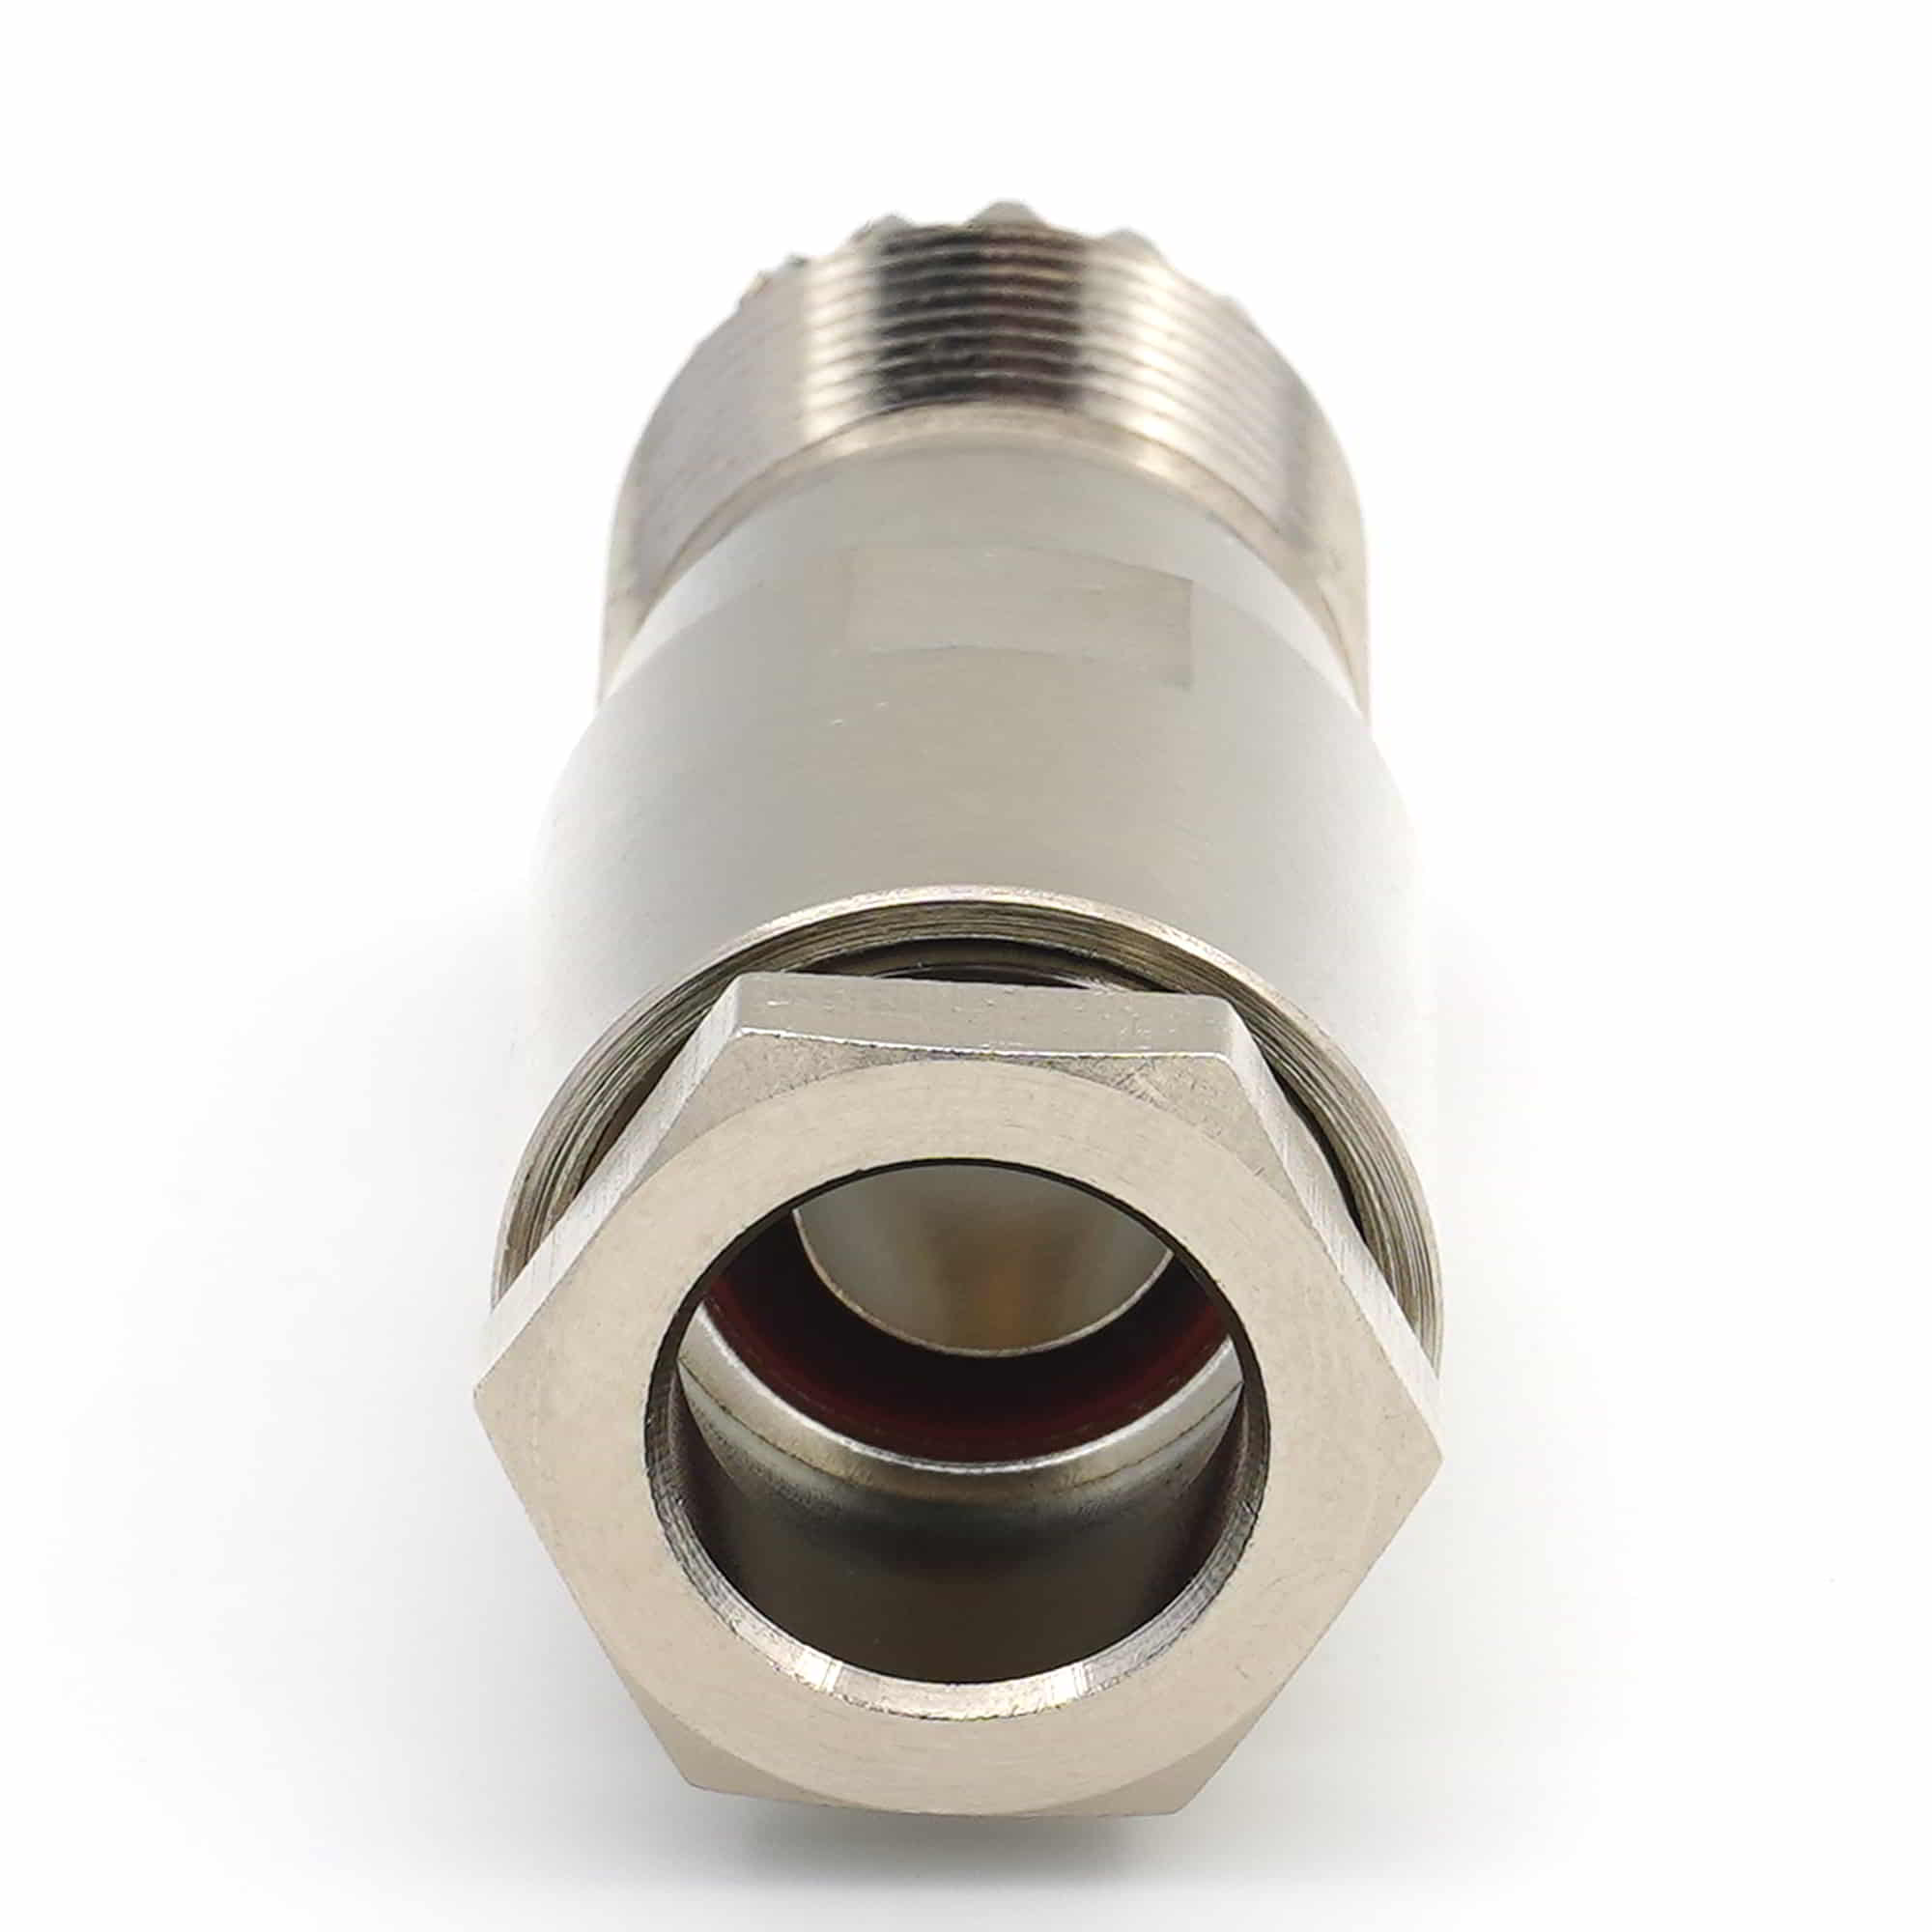 SO239 UHF Clamp/Screw Connector for 8D-FB